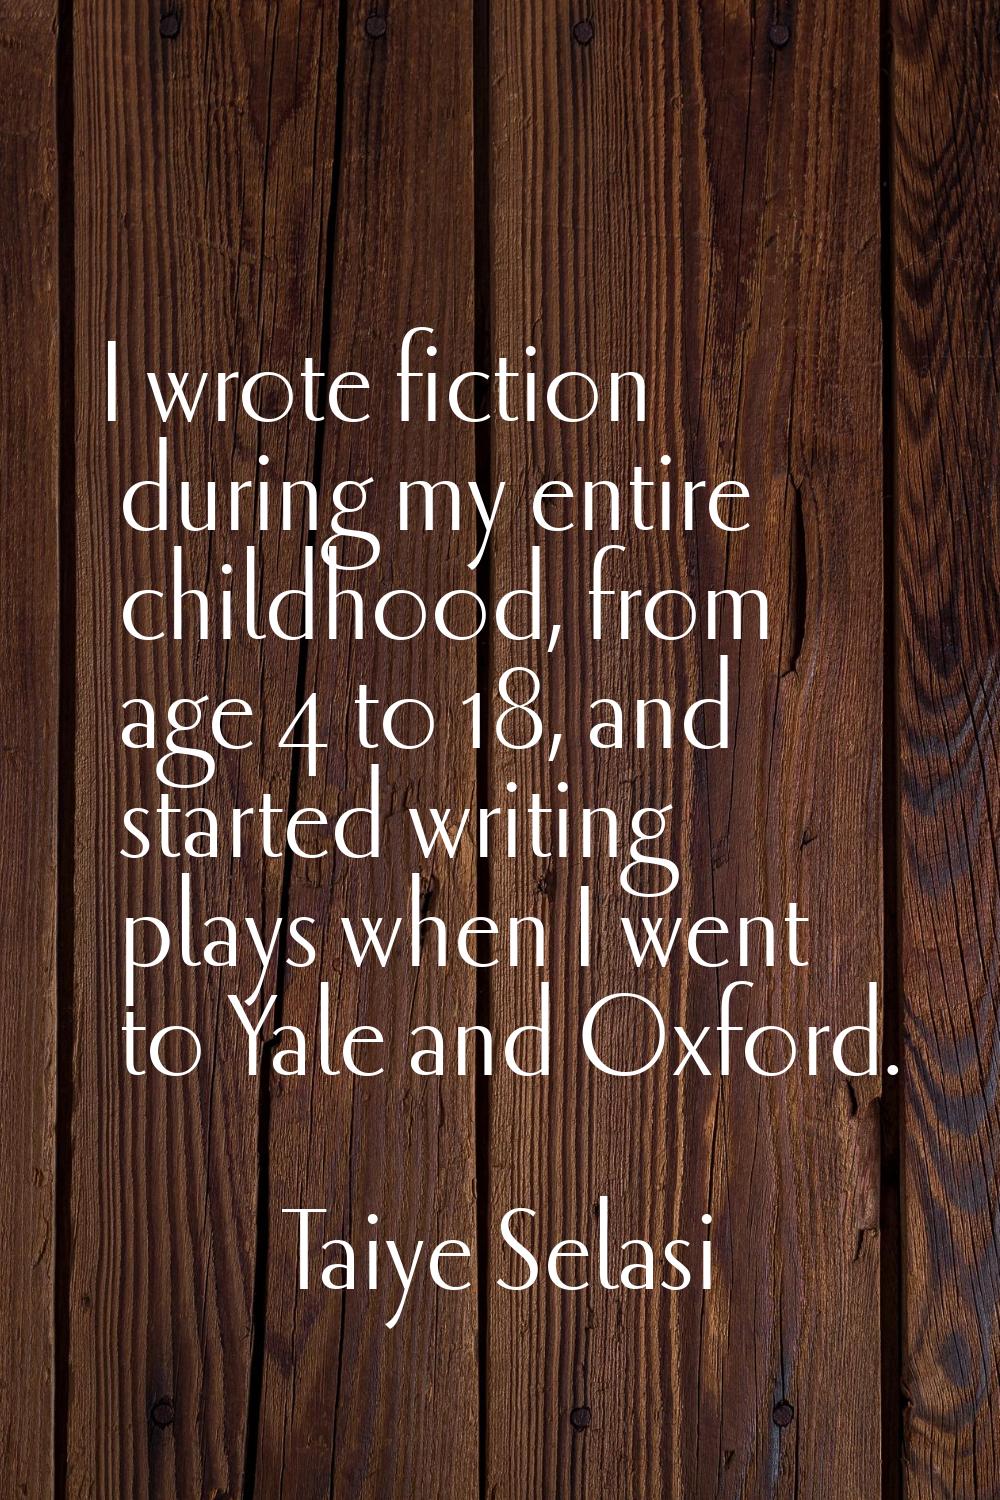 I wrote fiction during my entire childhood, from age 4 to 18, and started writing plays when I went